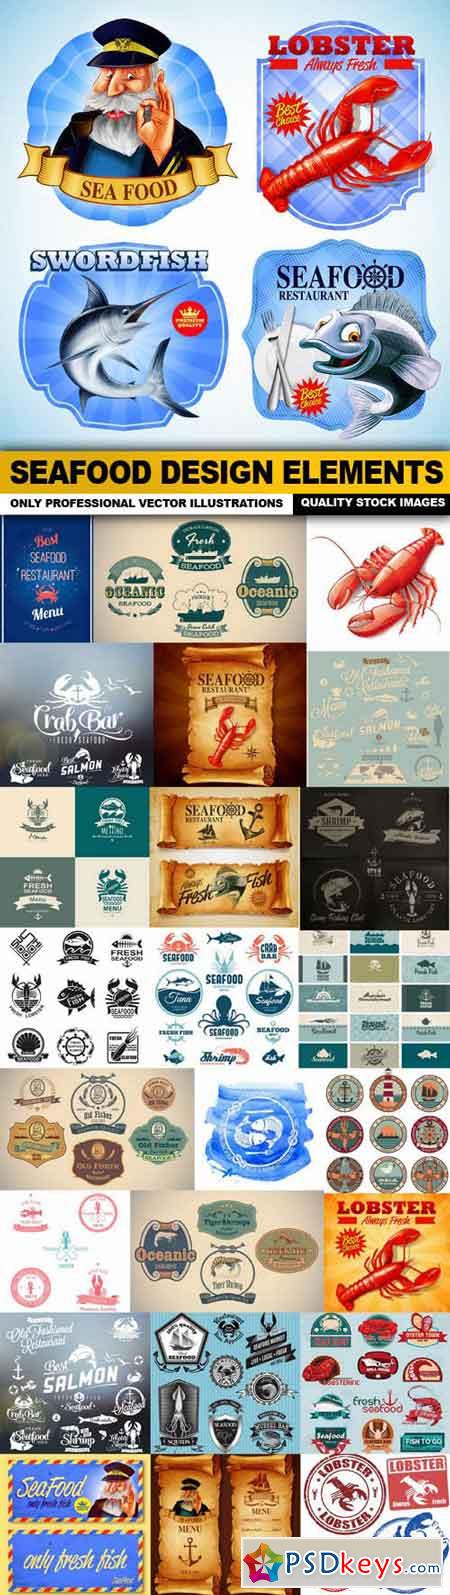 Seafood Design Elements - 25 Vector » Free Download Photoshop Vector ...